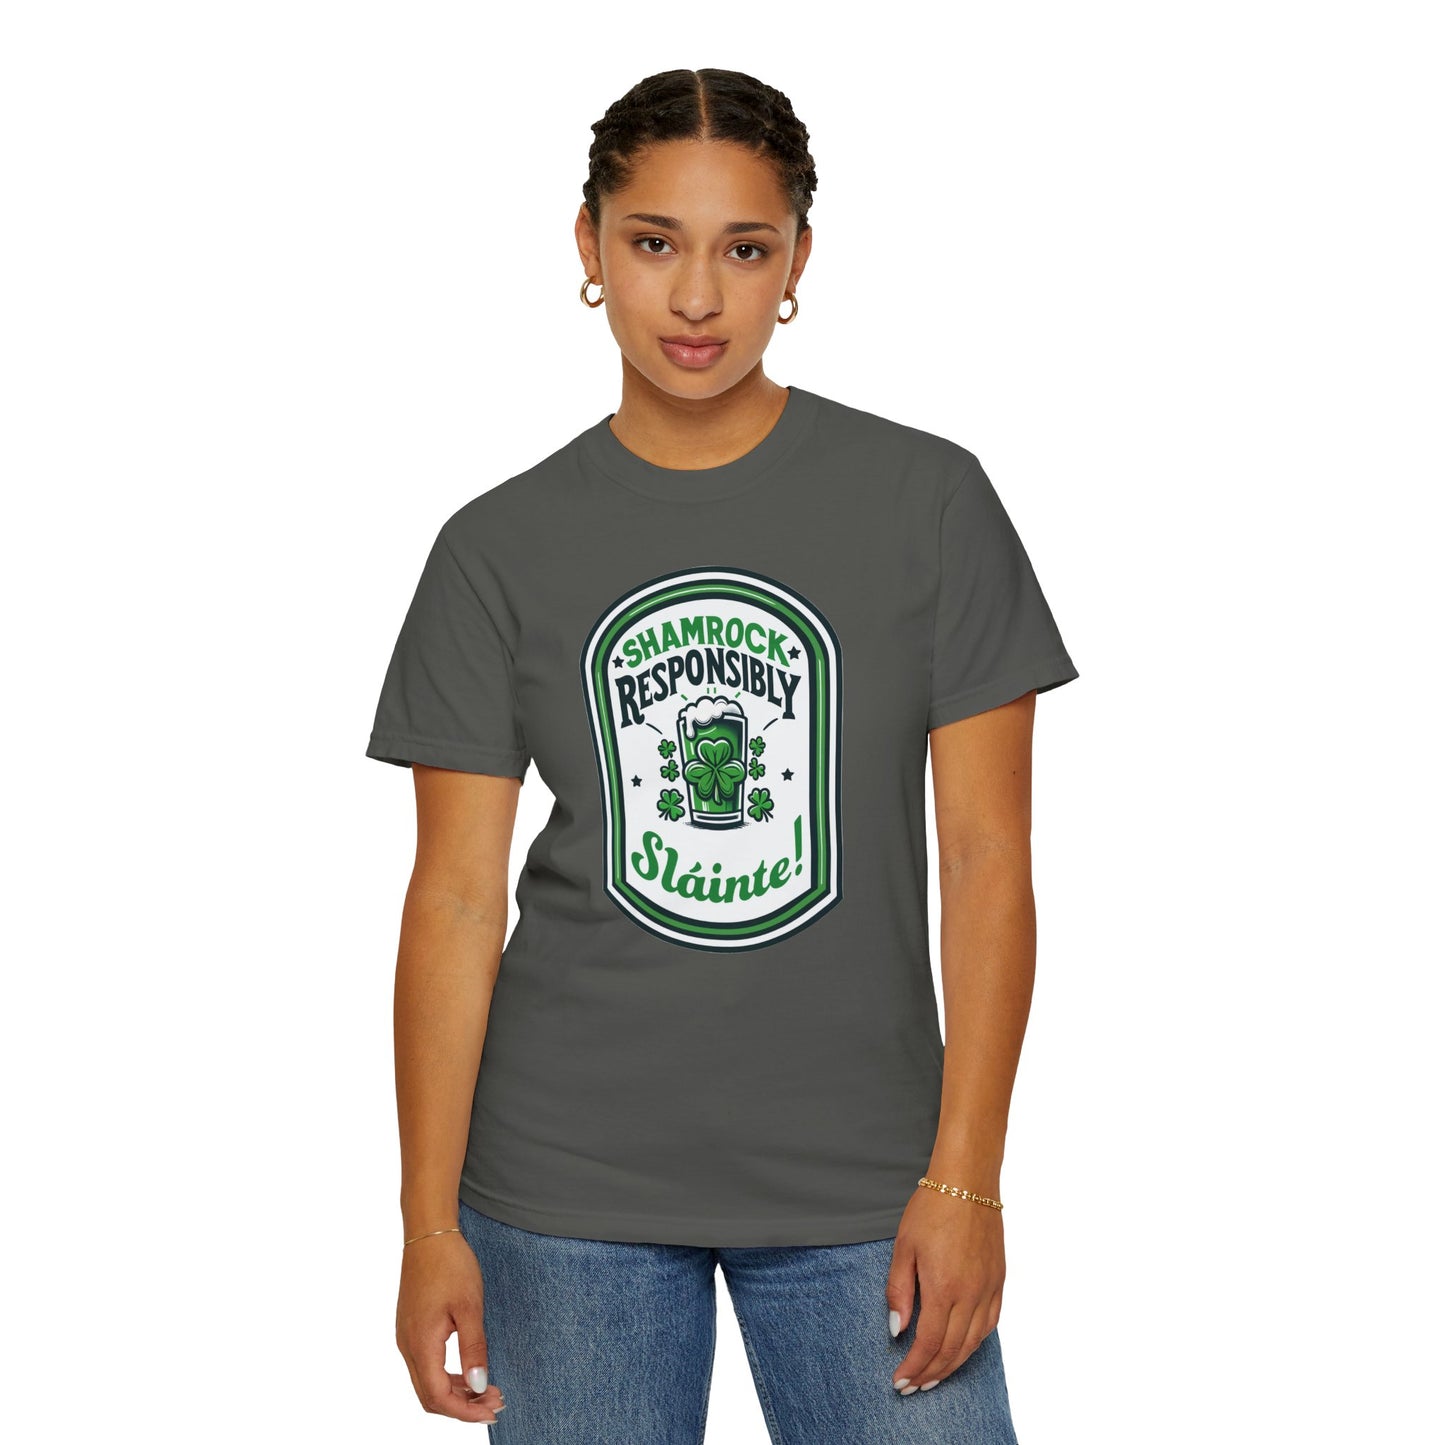 Shamrock Responsibly Slainte Garment-Dyed T-shirt, St. Patrick's Day Tee, Lucky Funny Beer Drinking Shirt